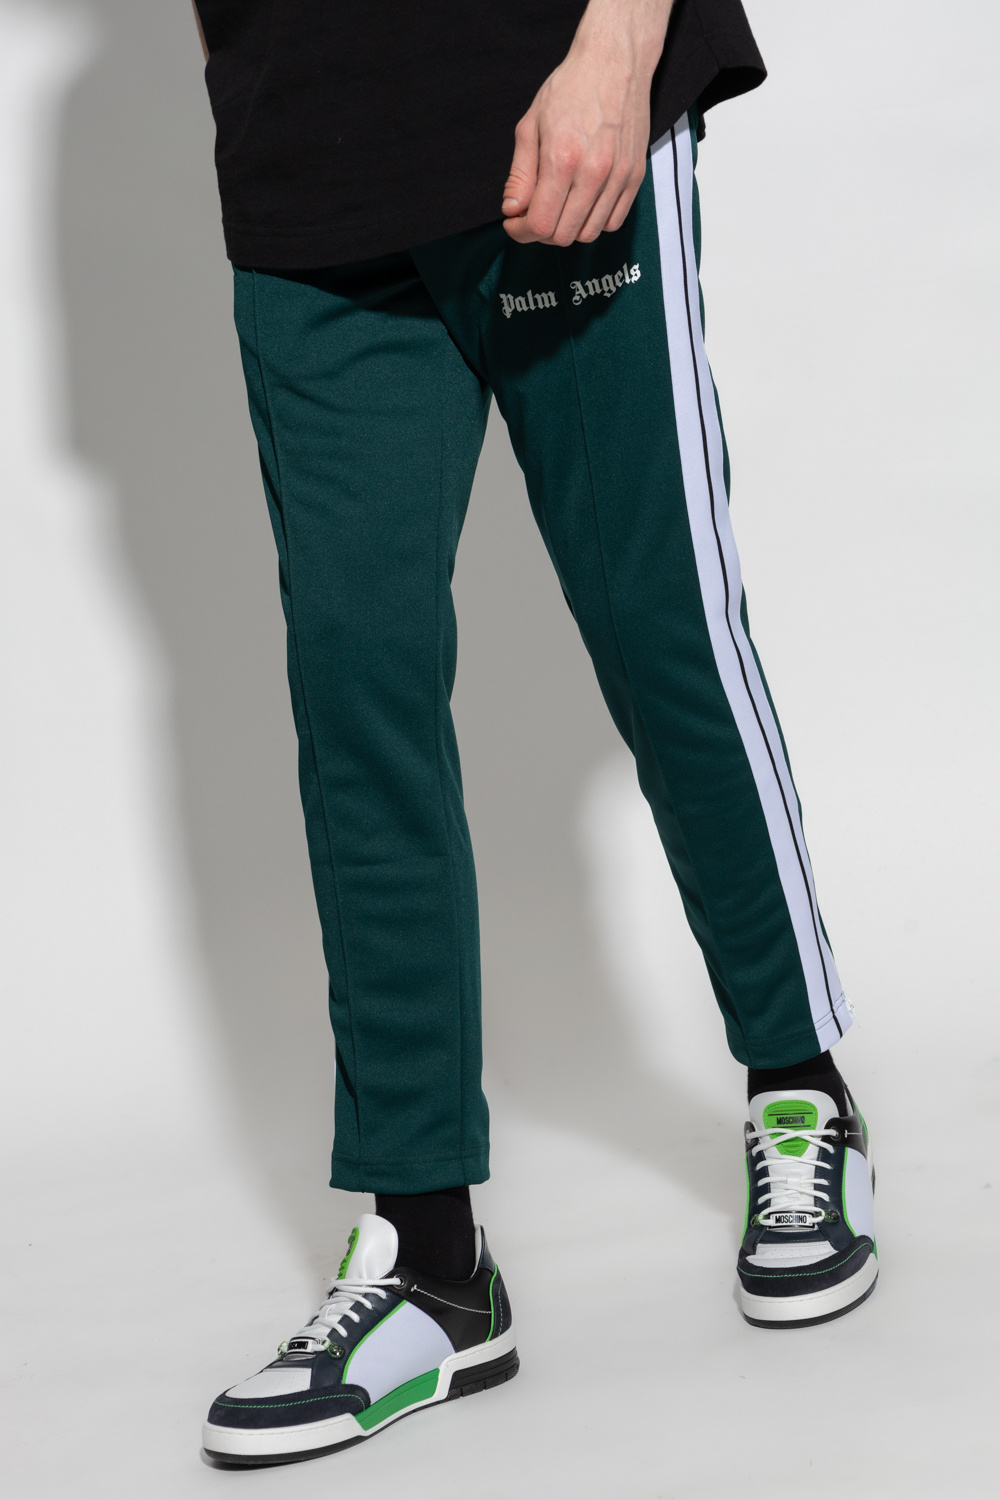 Palm Angels Lhd trousers with logo